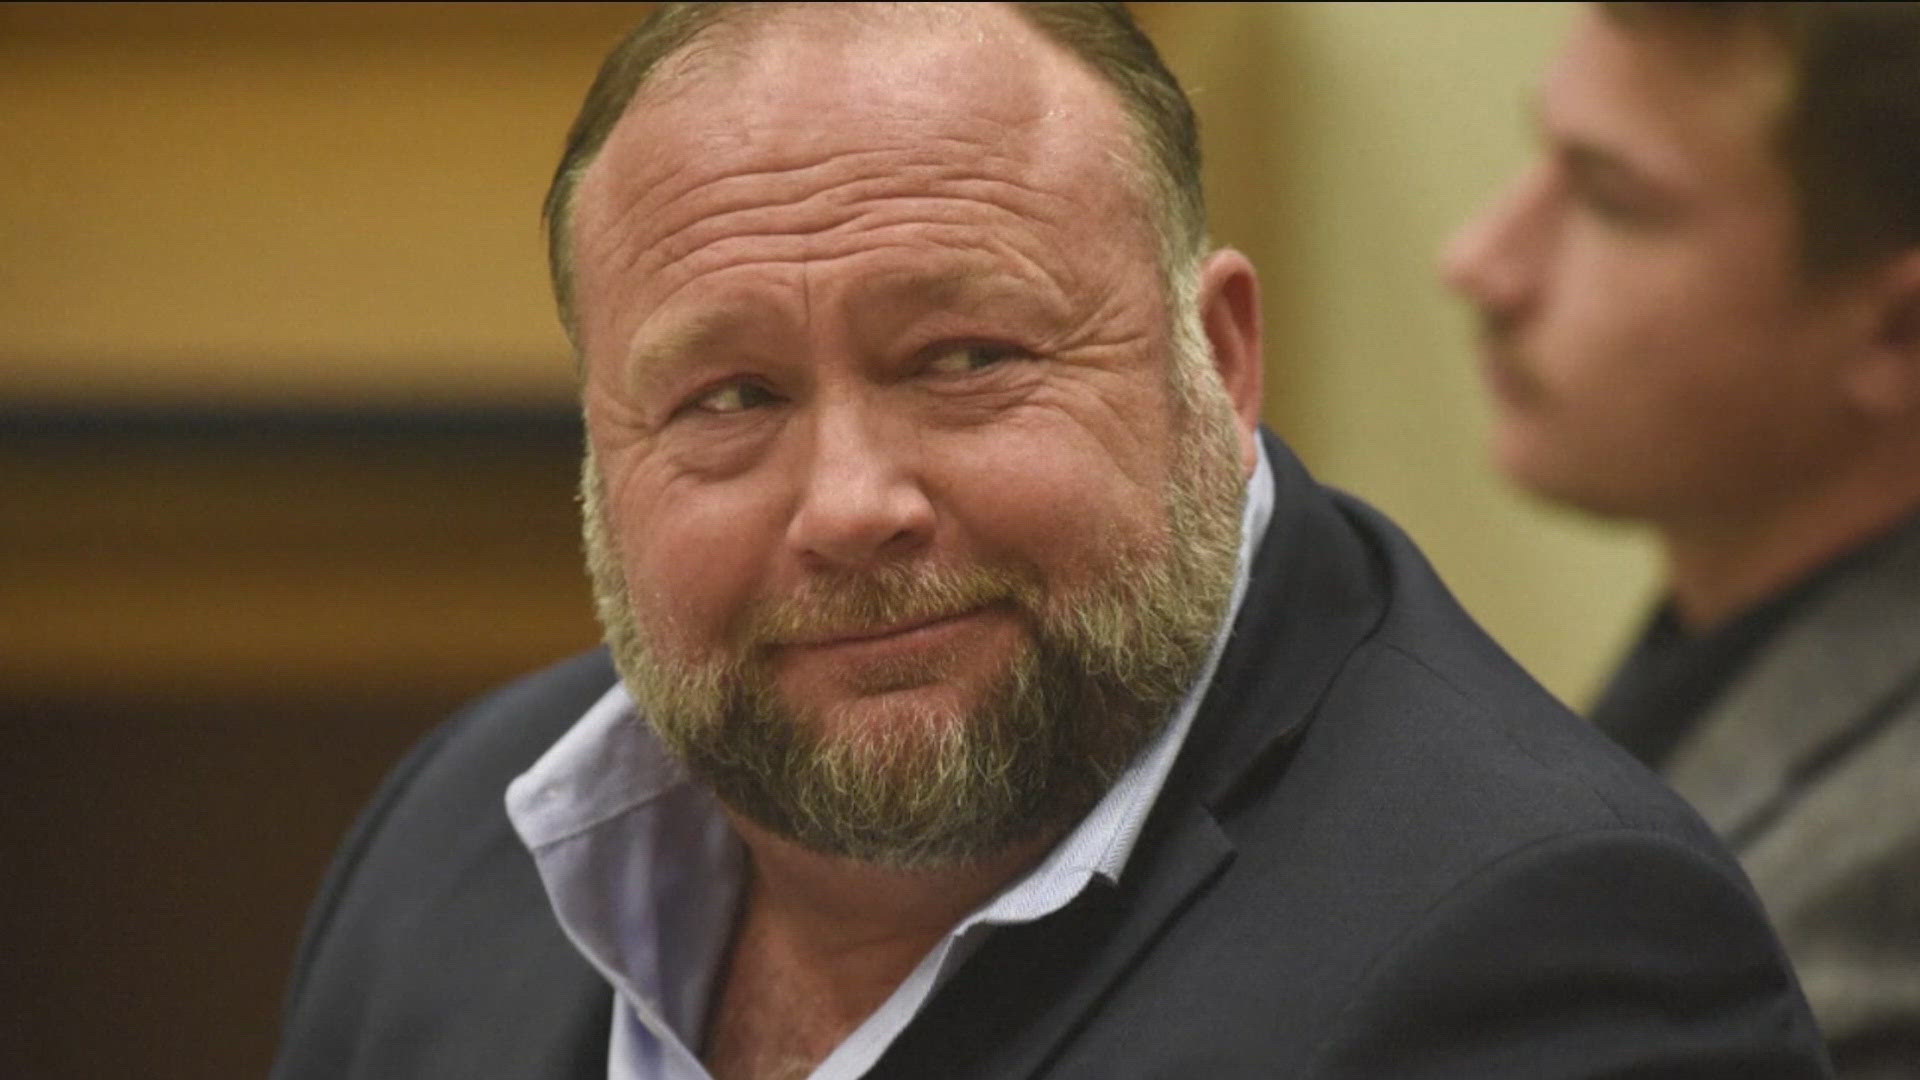 Alex Jones is asking a court for permission to liquidate and sell off his assets to help pay off the $1.5 billion he owes to the families of Sandy Hook victims.